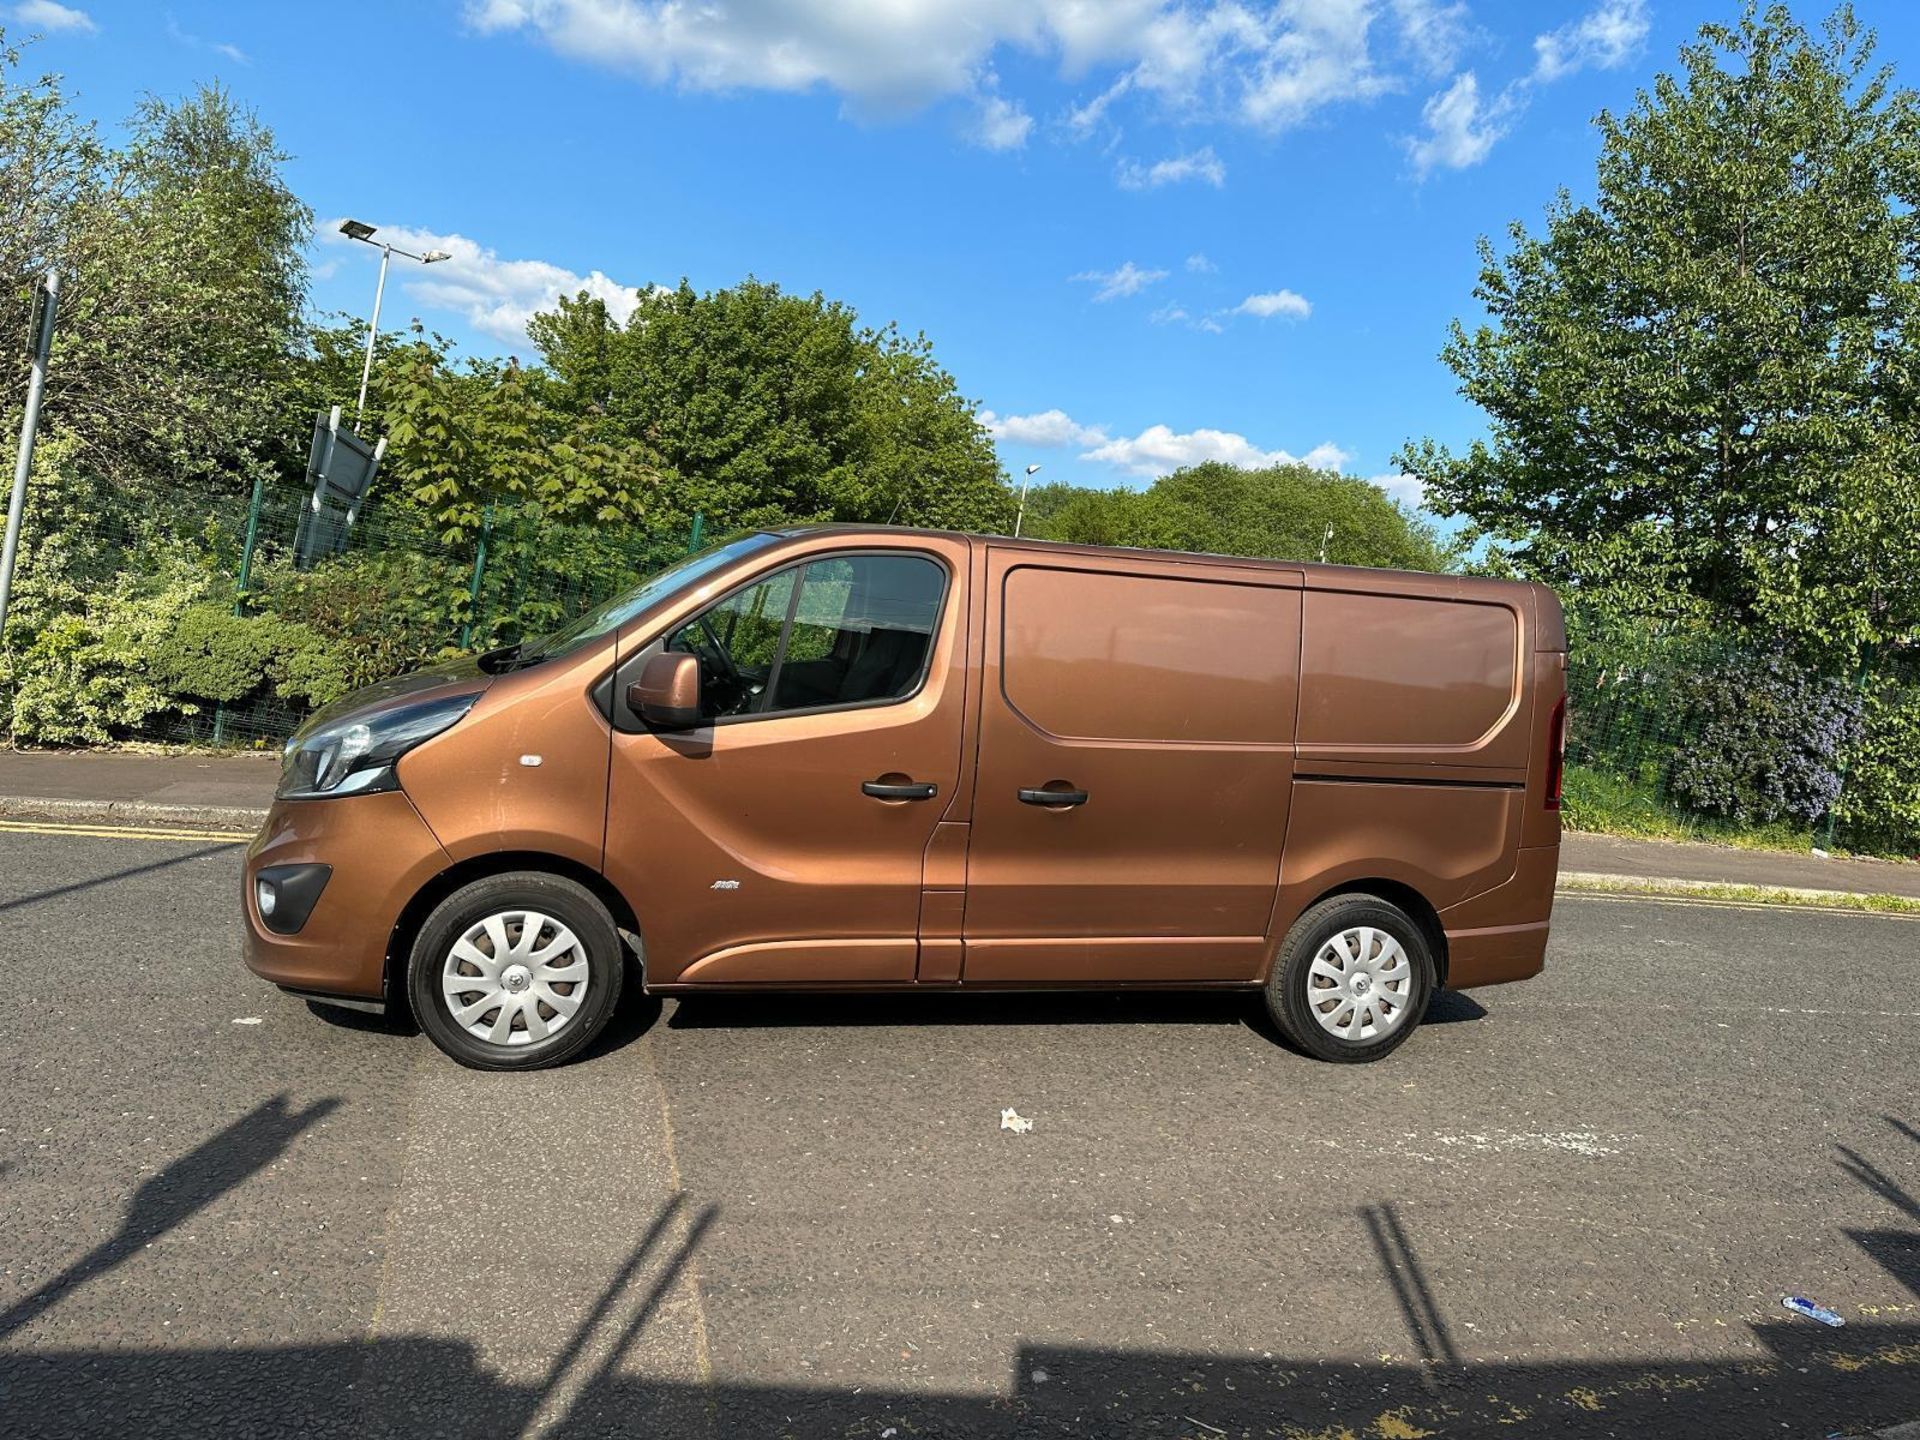 16 PLATE VIVARO READY FOR WORK: REMOTE LOCKING AND ELECTRIC WINDOWS